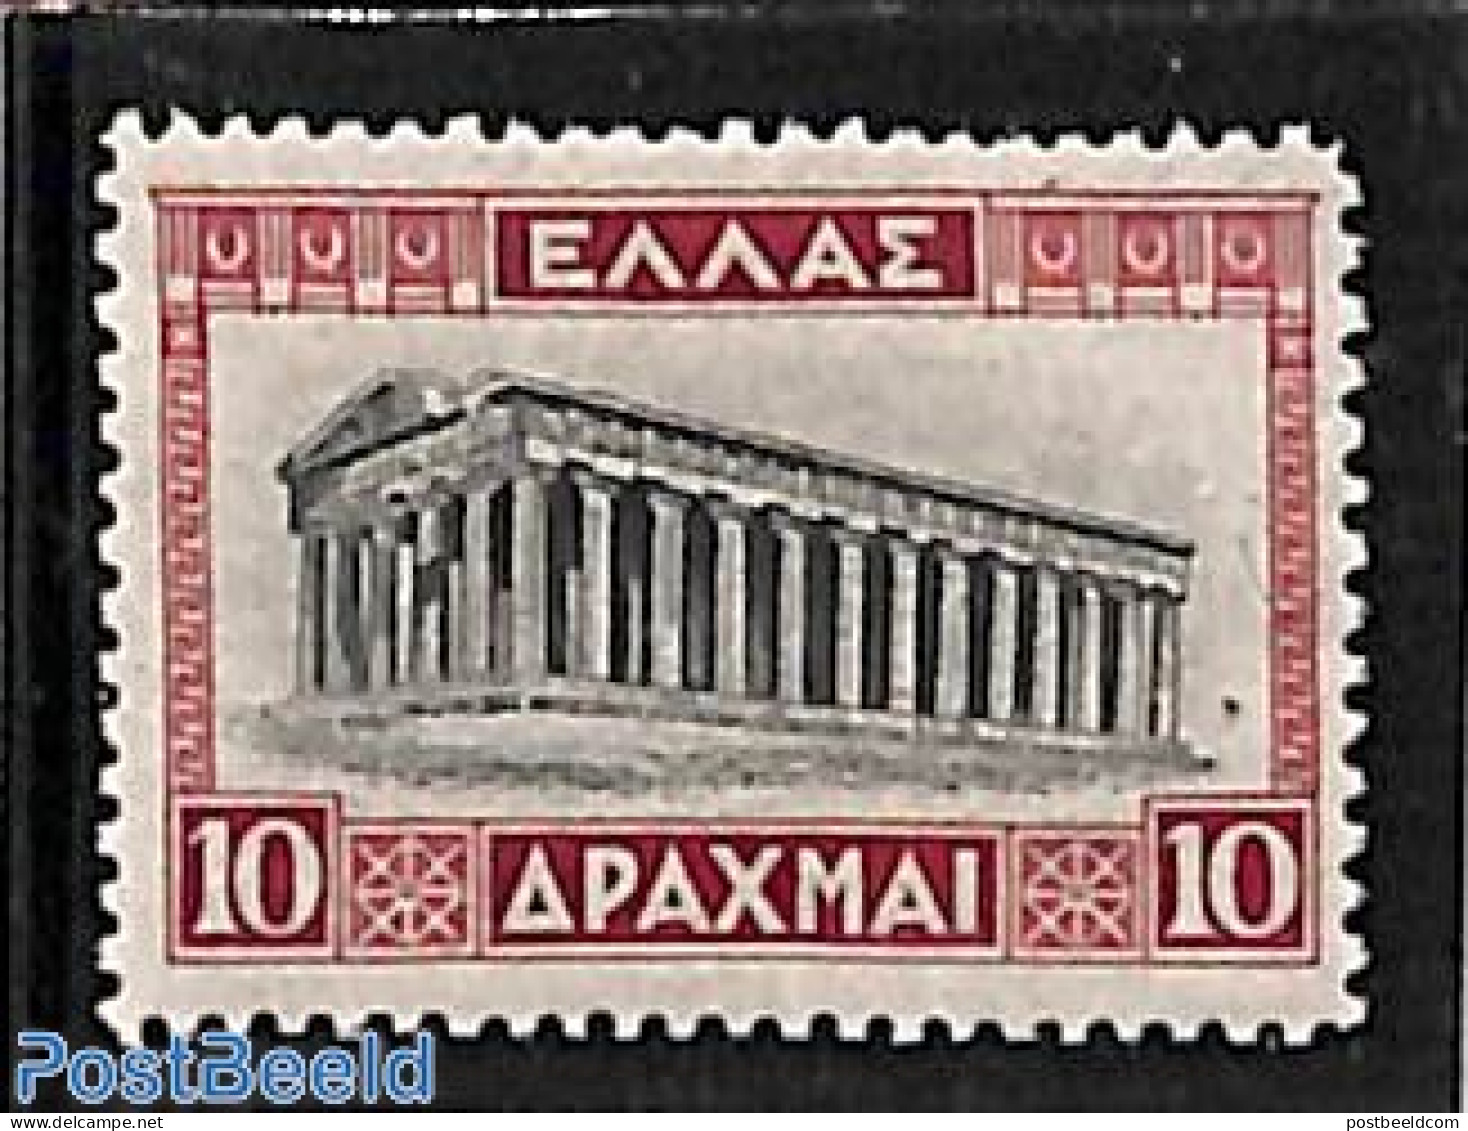 Greece 1927 10Dr, Perkins Print, Stamp Out Of Set, Unused (hinged) - Neufs